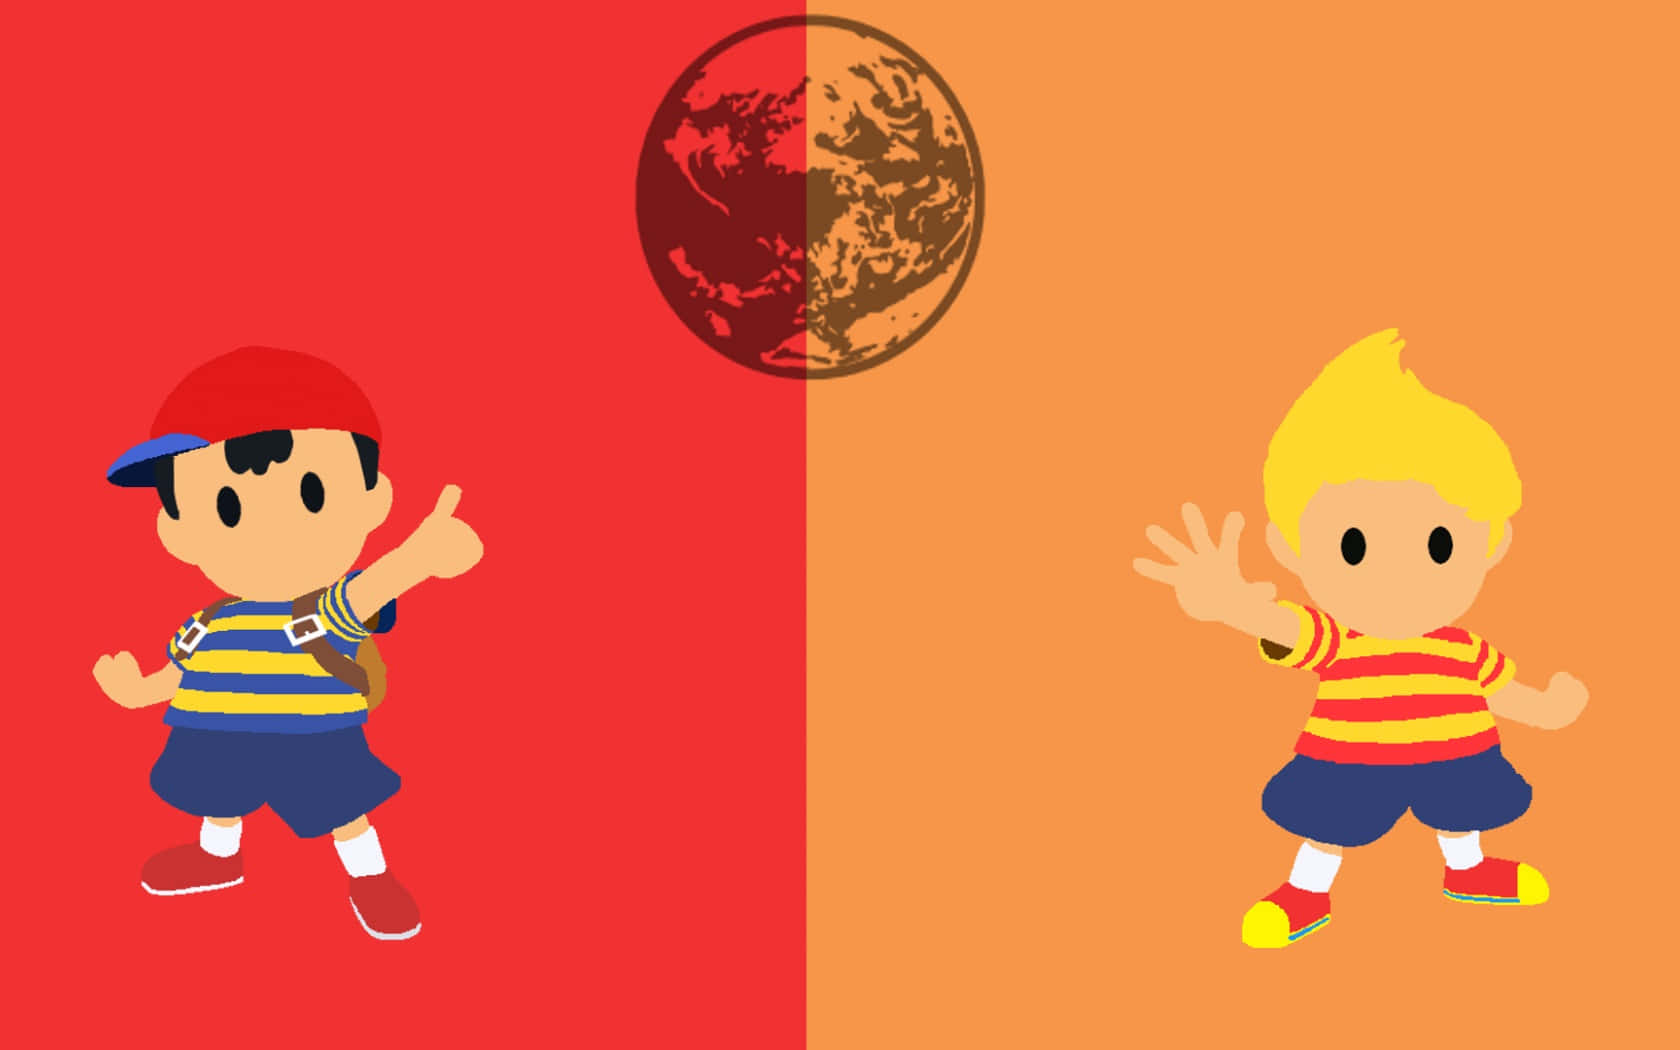 Journey through the world of Earthbound